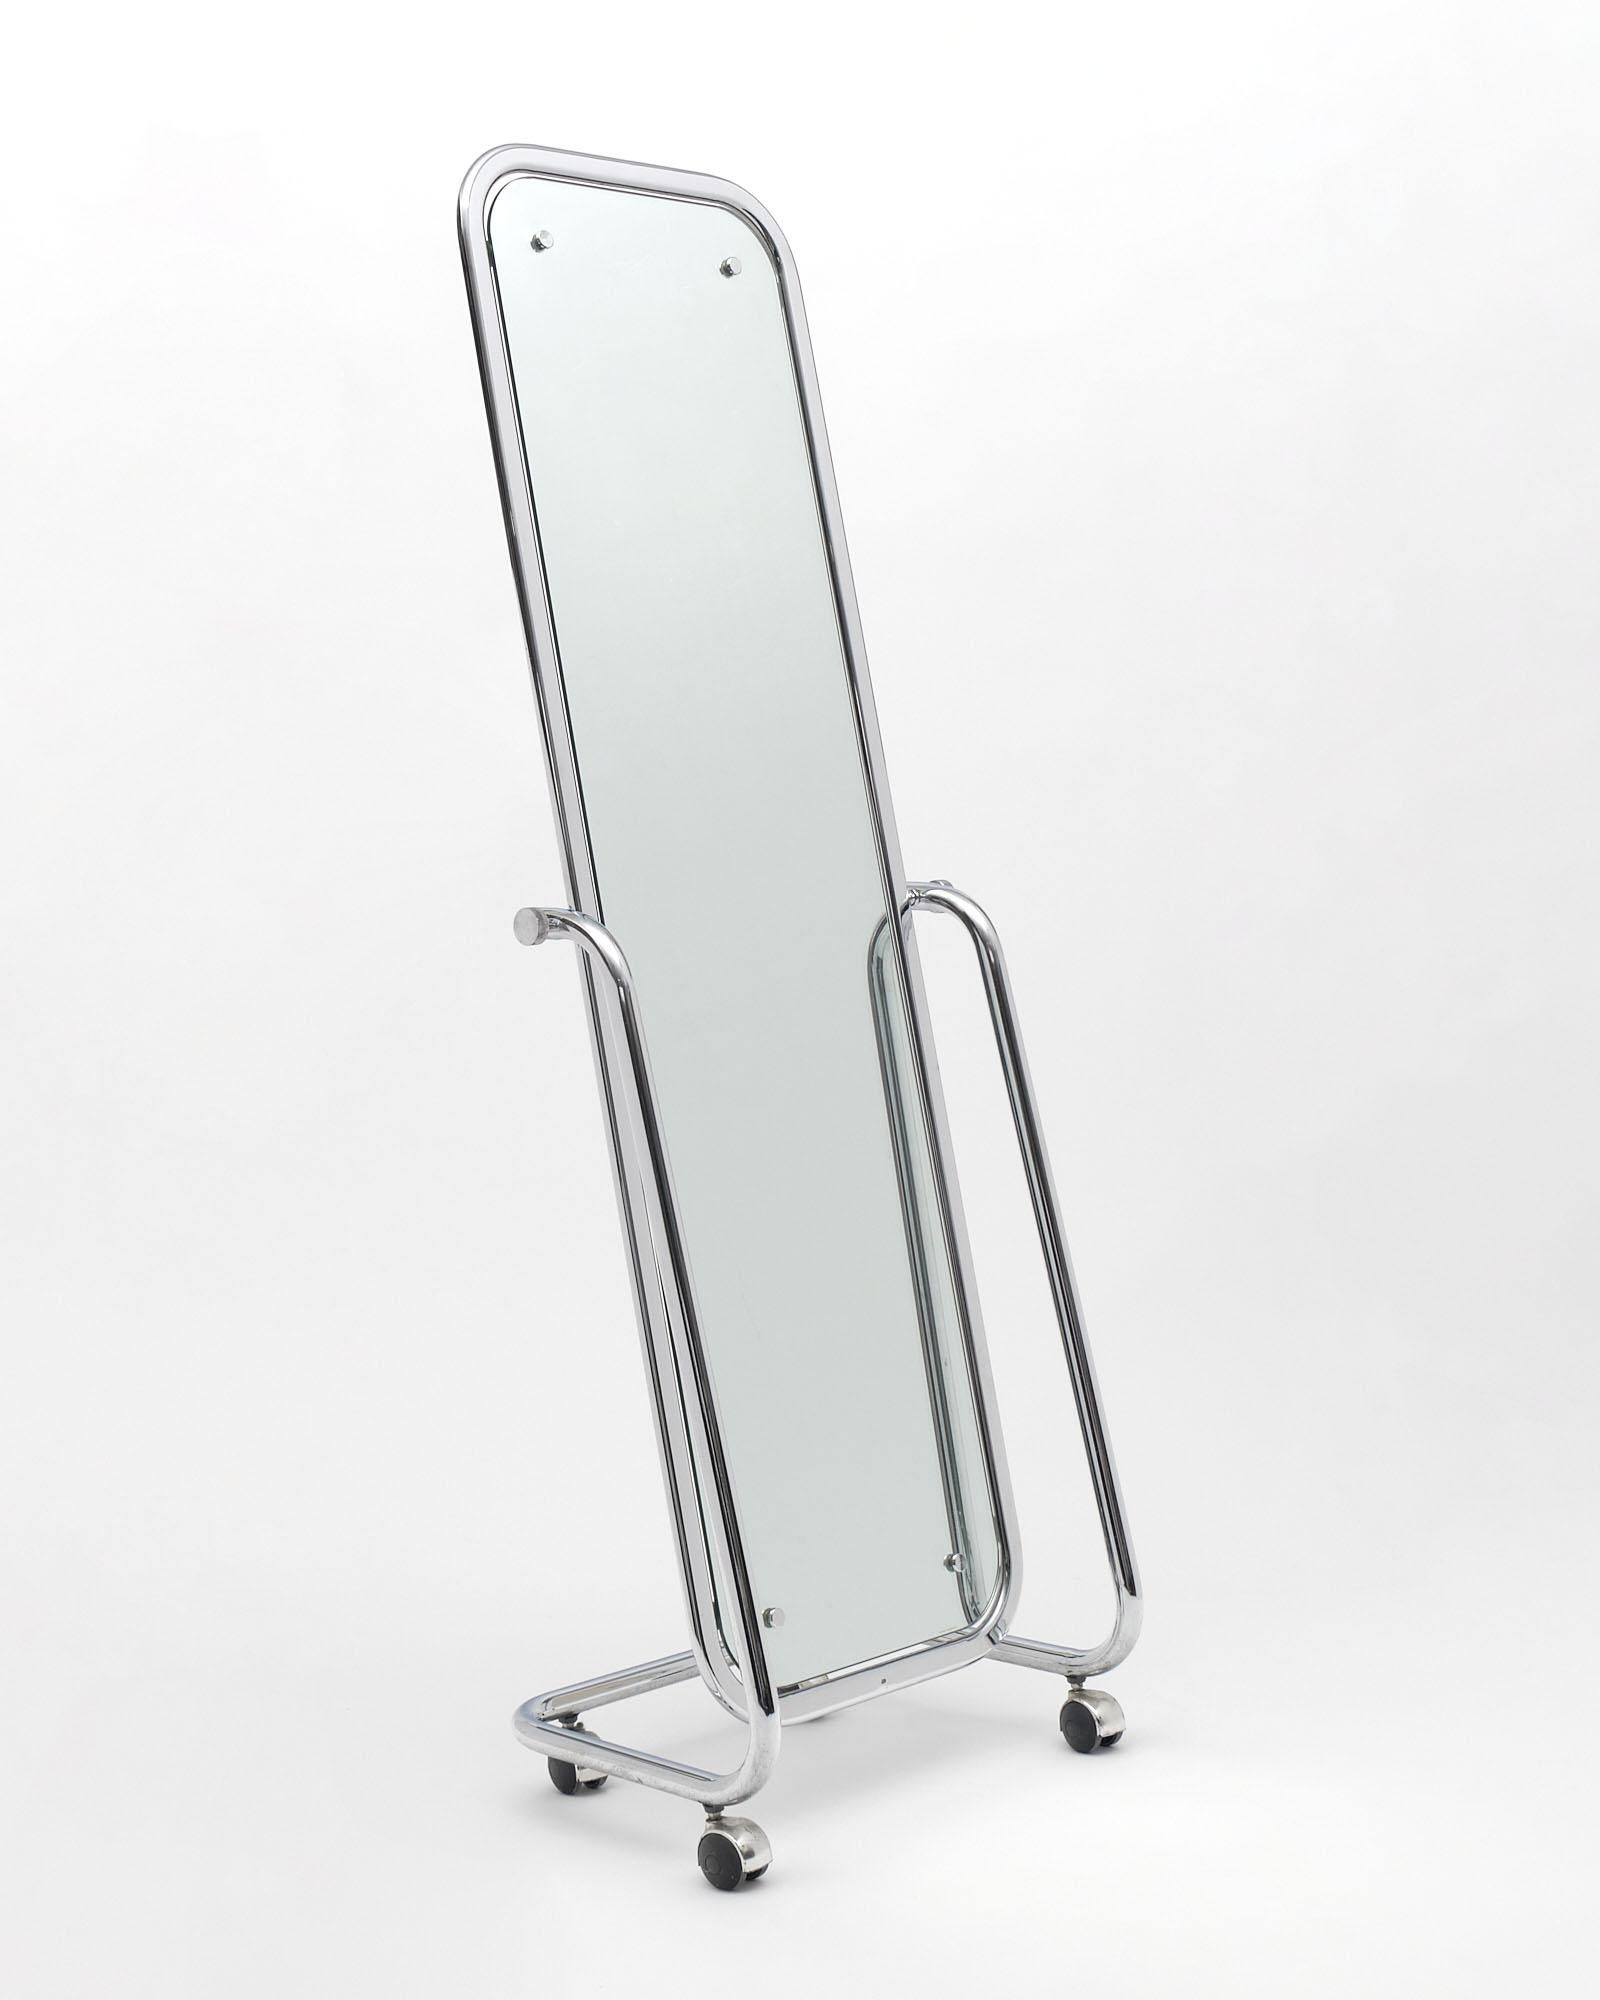 Psyche mirror from Italy. This piece has an oblong chromed steel structure articulated on 4 casters.